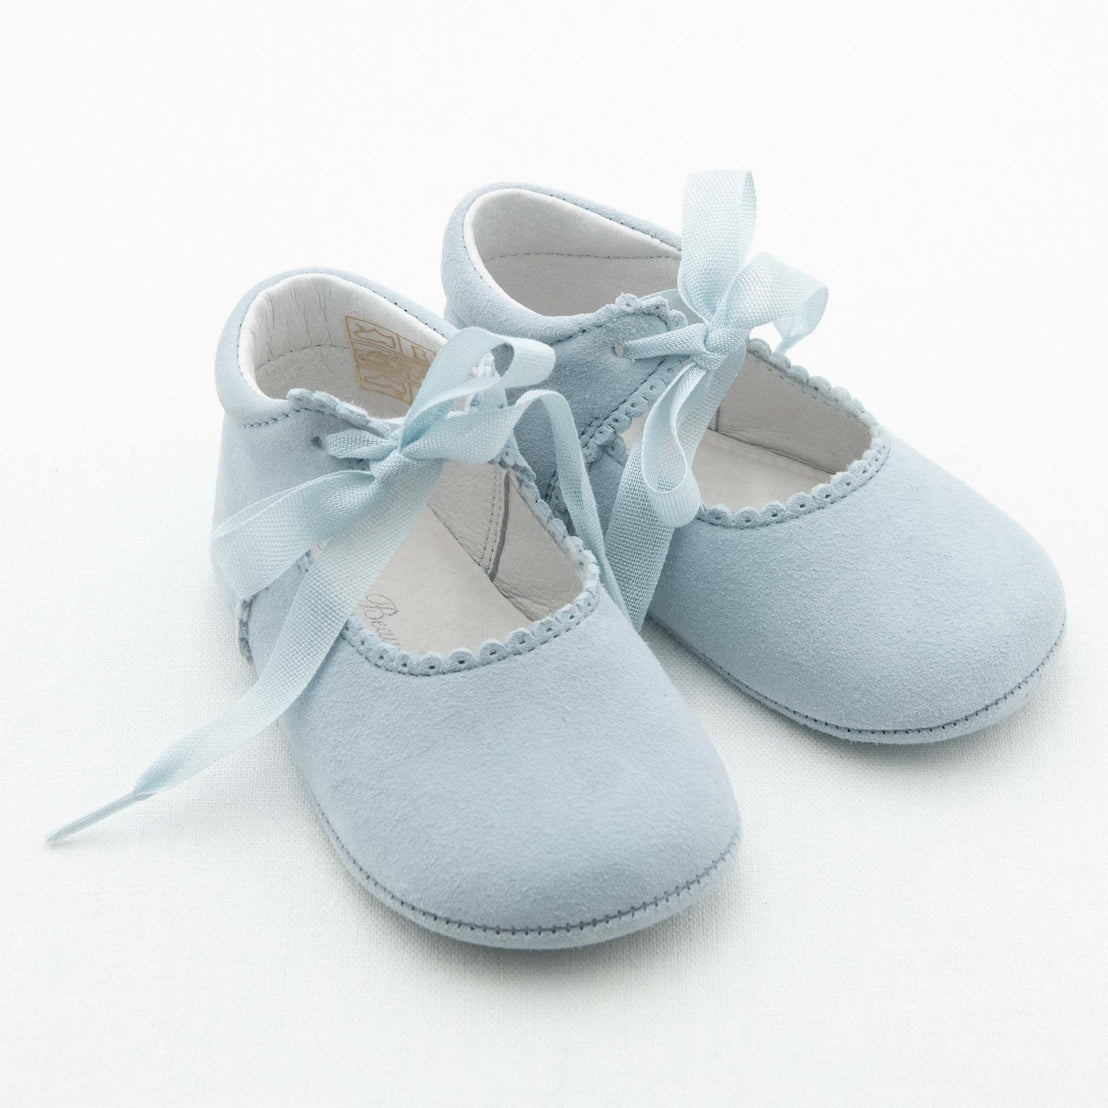 A pair of light blue handcrafted "Thea Suede Tie Mary Janes" from Baby Beau & Belle, adorned with bows on top and featuring scalloped edges. Made from a soft, suede-like material, the shoes are placed side by side on a white background.